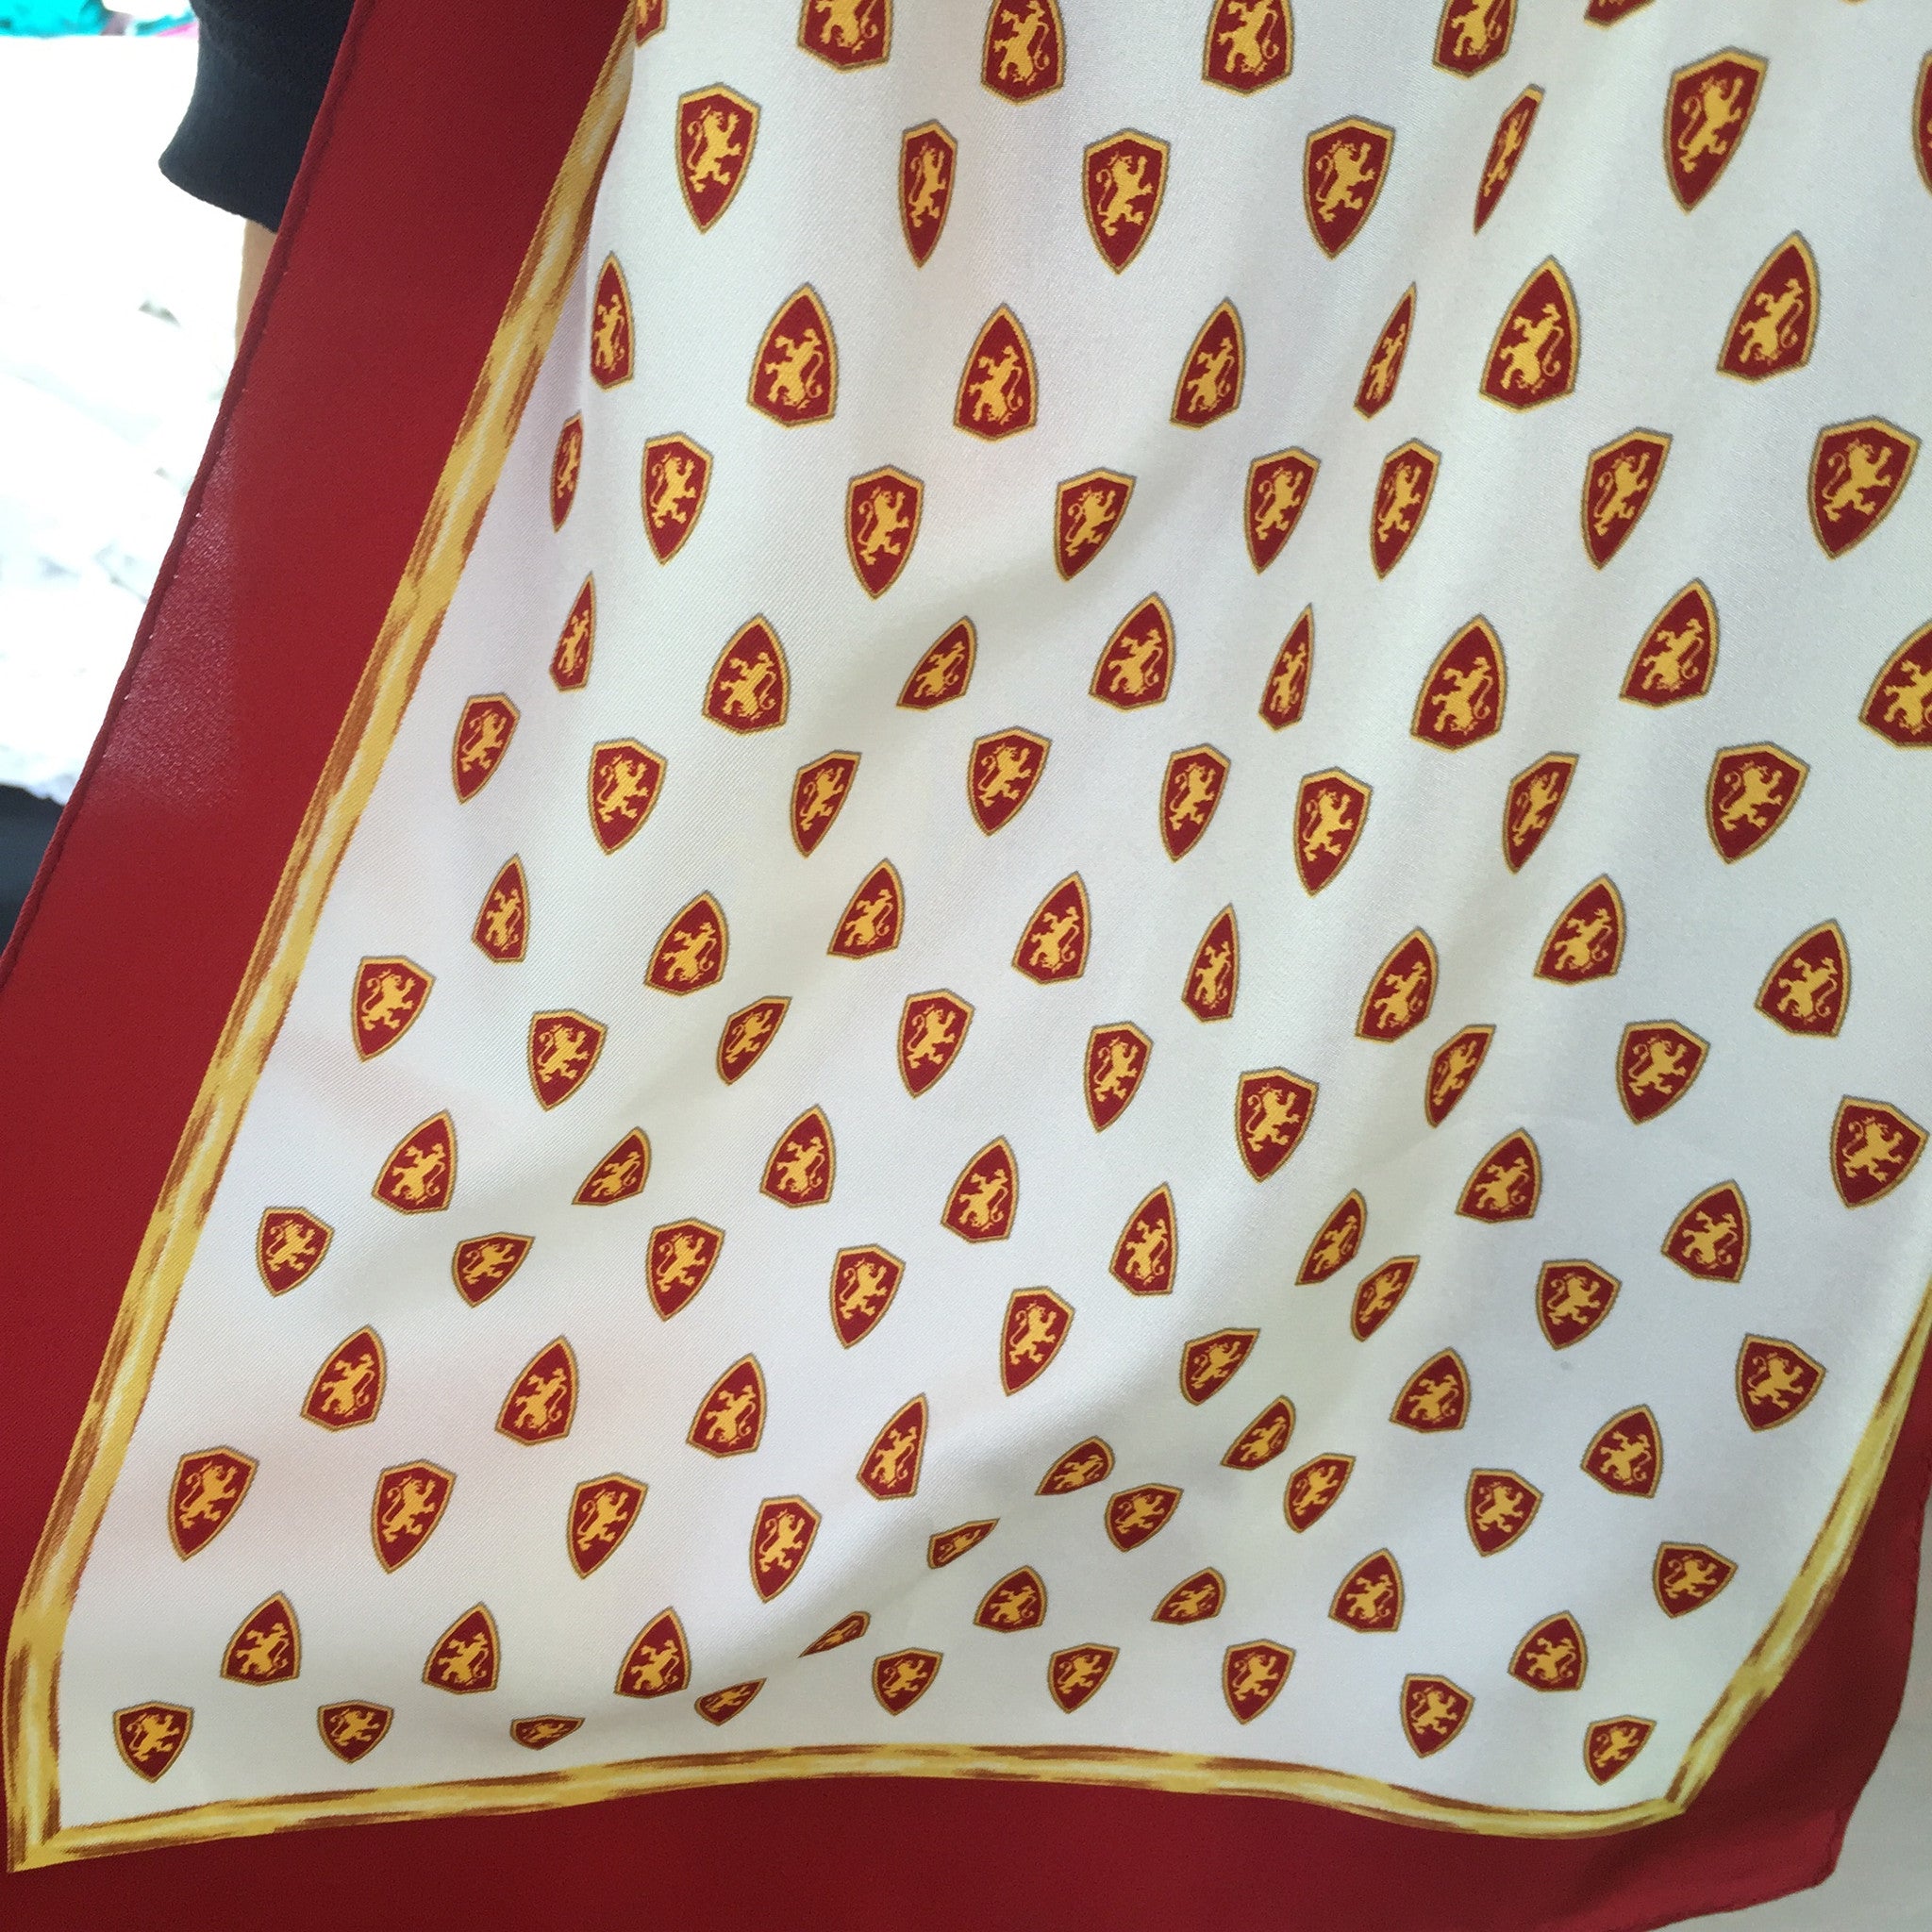 Silk scarf with red and gold border with Flagler College shield logo throughout white center